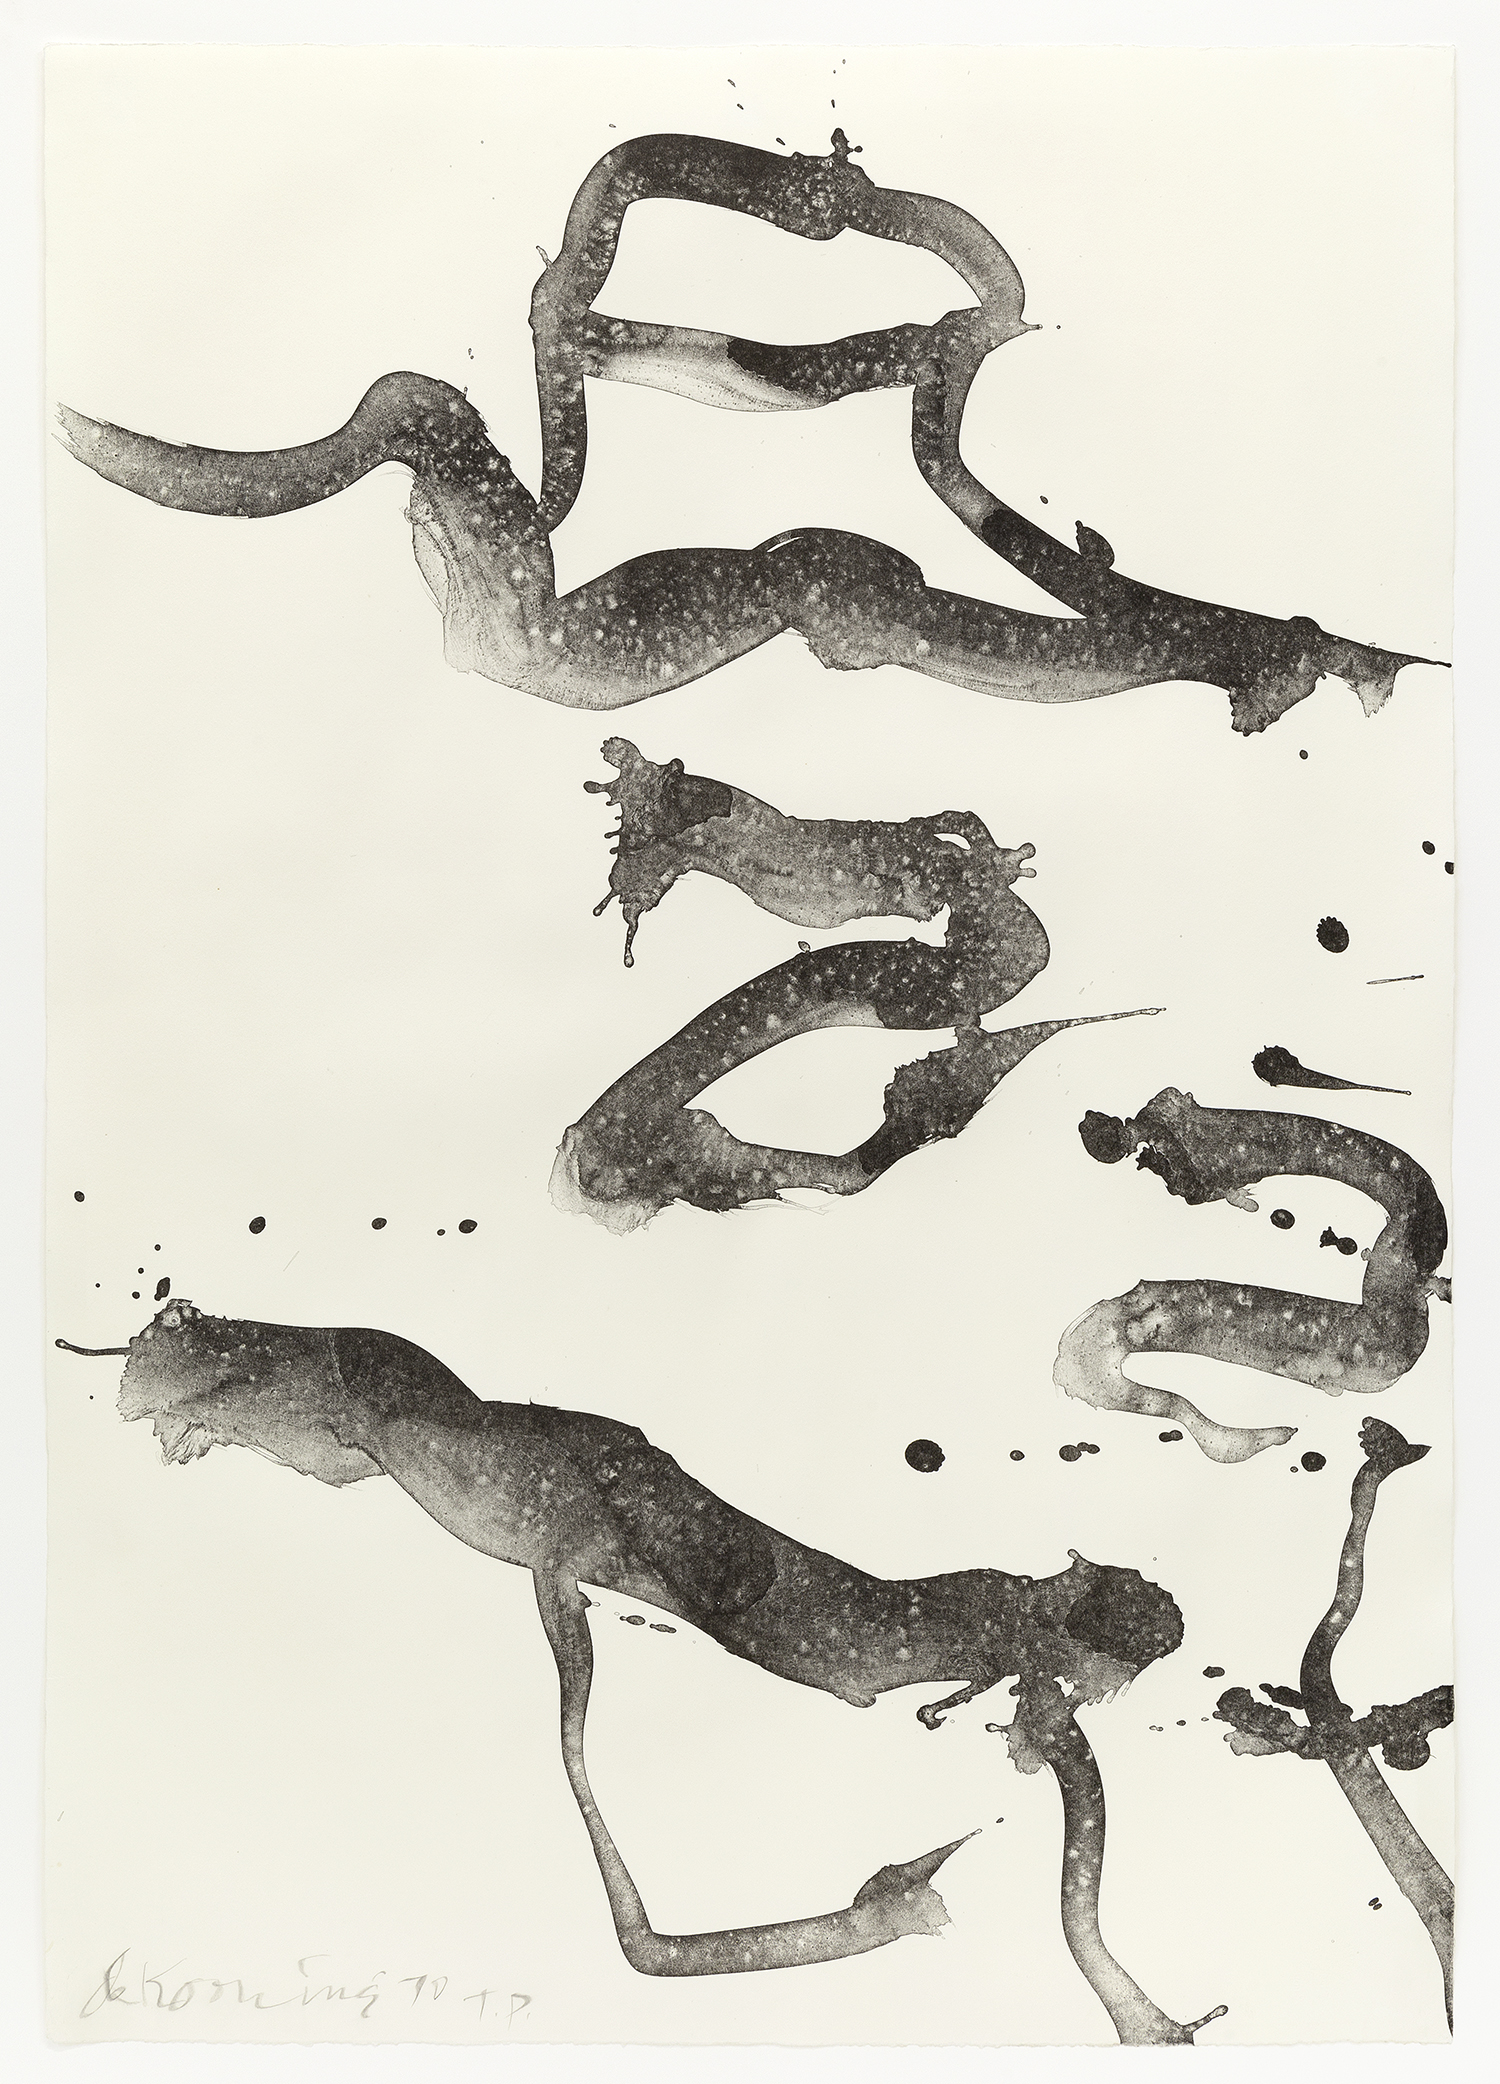 Weekend at Mr. and Mrs. Krisher, 1970-71, Lithograph, 42 1/2 x 30 inches (108 x 76.2 cm), Edition of 75